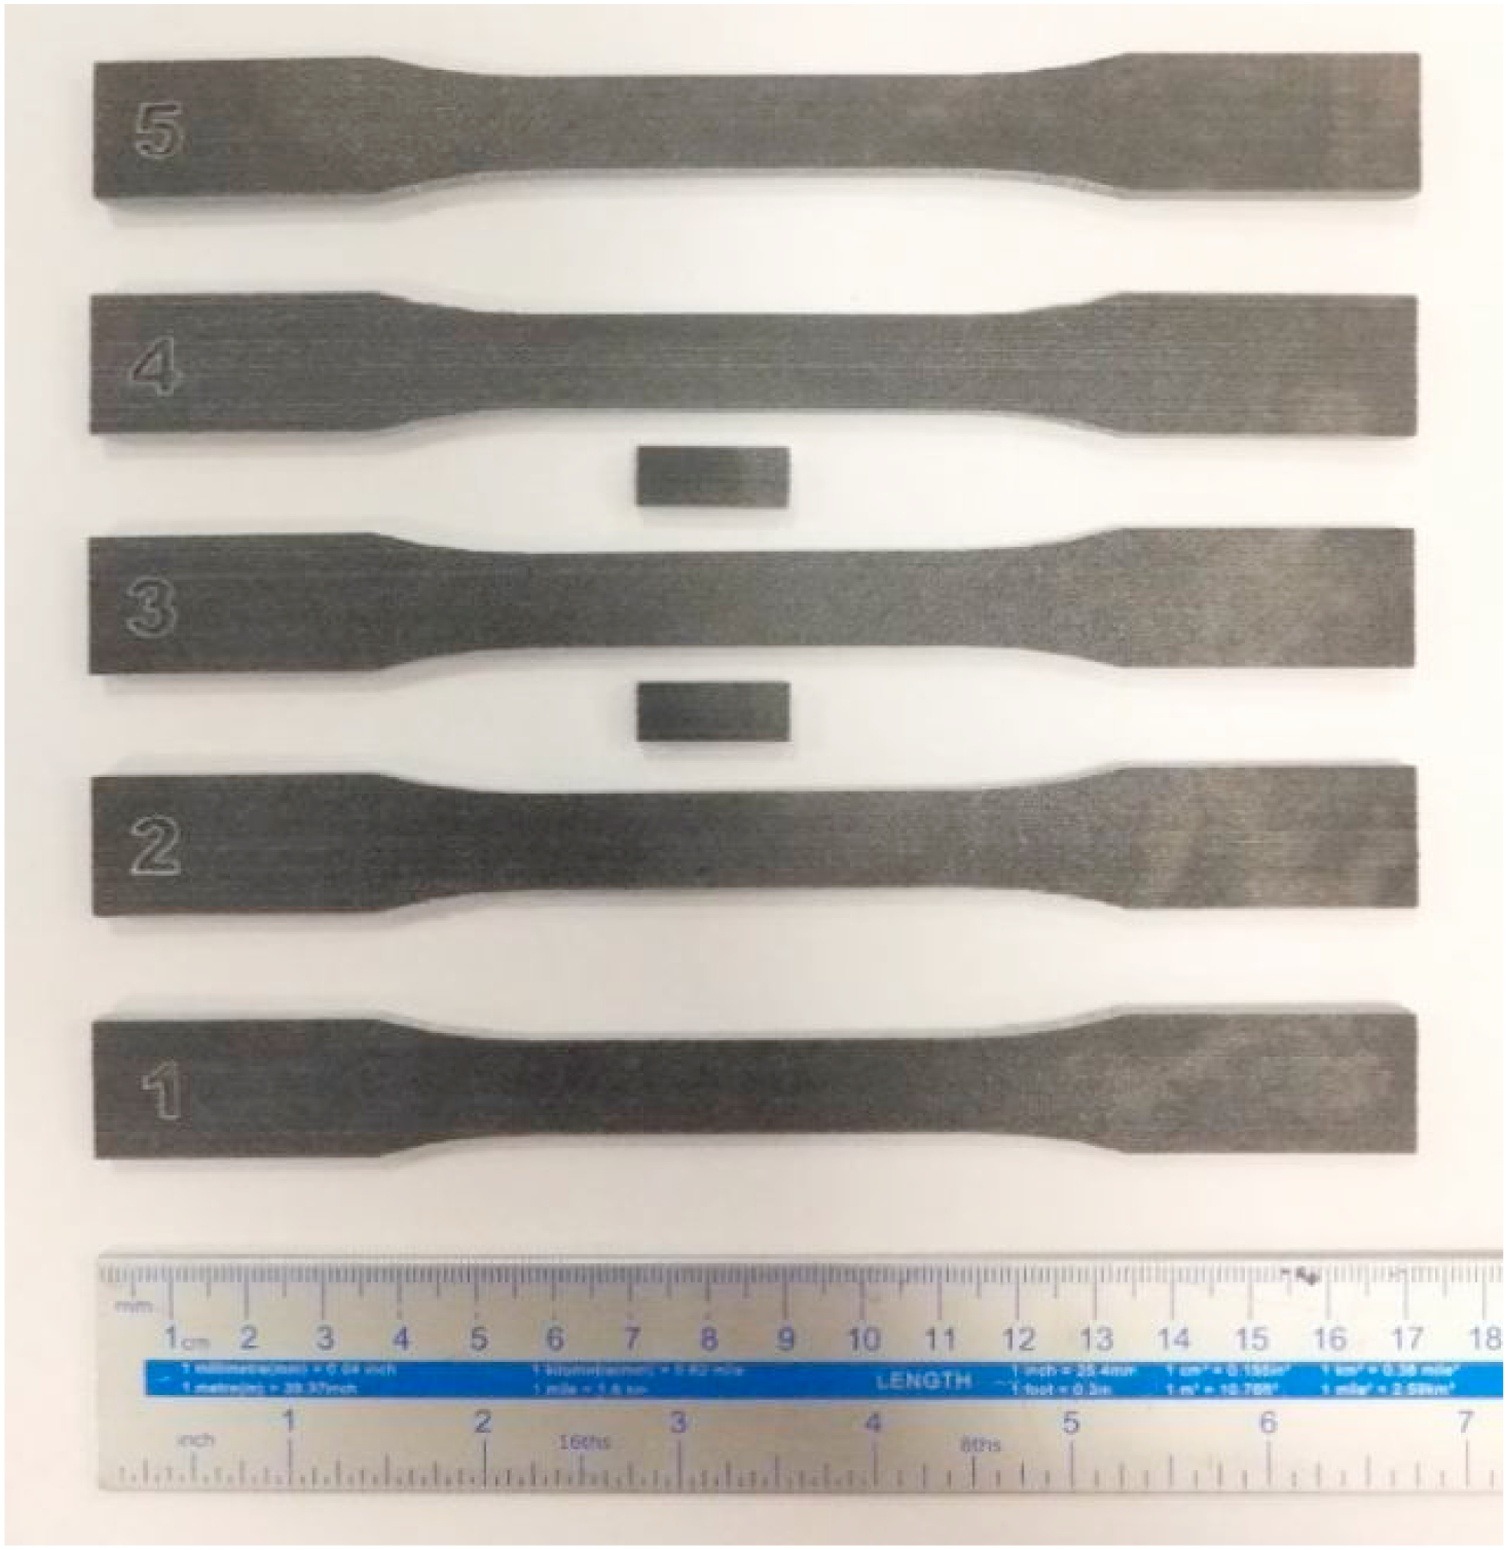 A set of test samples produced by the HSS process - Five test samples are shown lined up above a ruler. The test samples were produced by the HSS process.